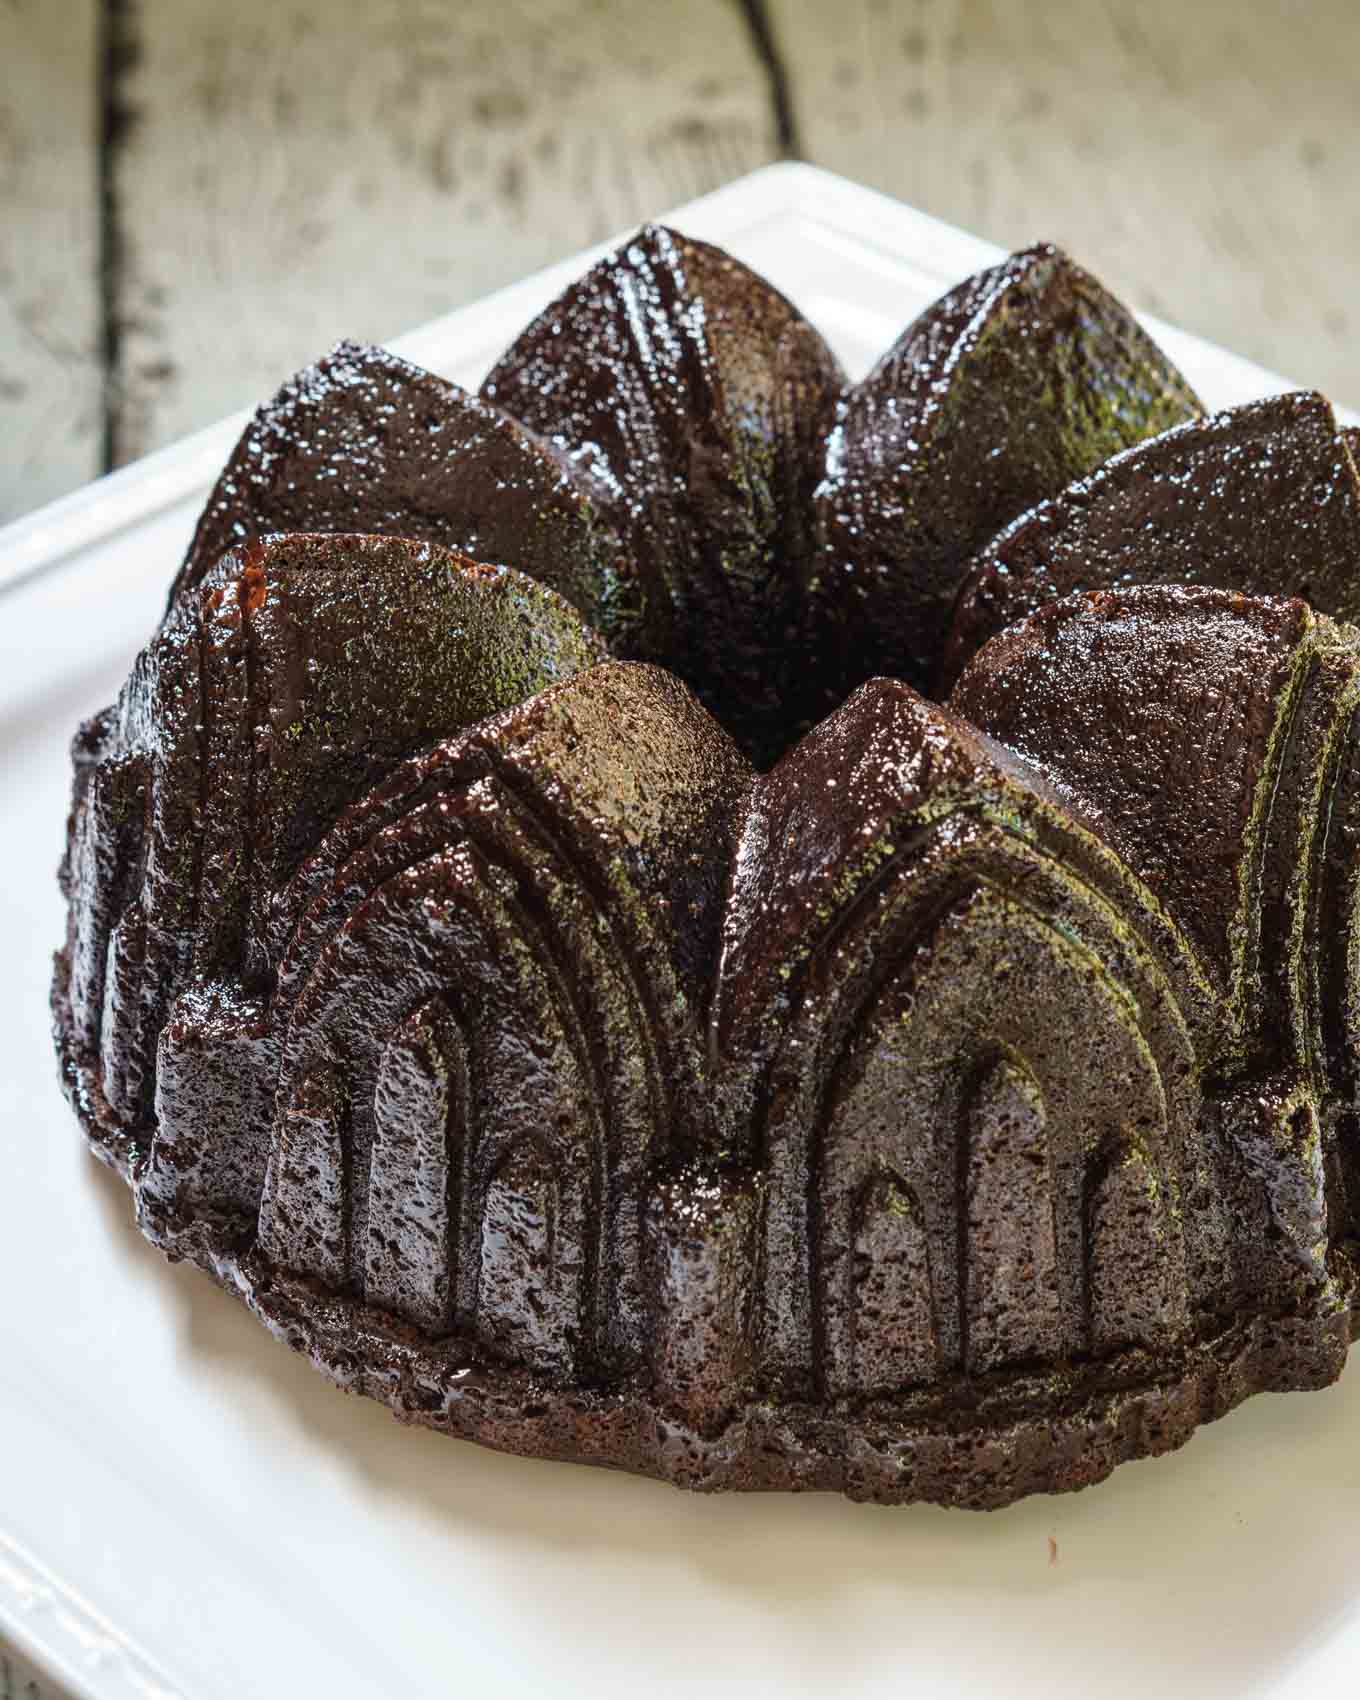 A top-angled view of a raspberry glazed chocolate raspberry bundt pan sitting on a white plate.